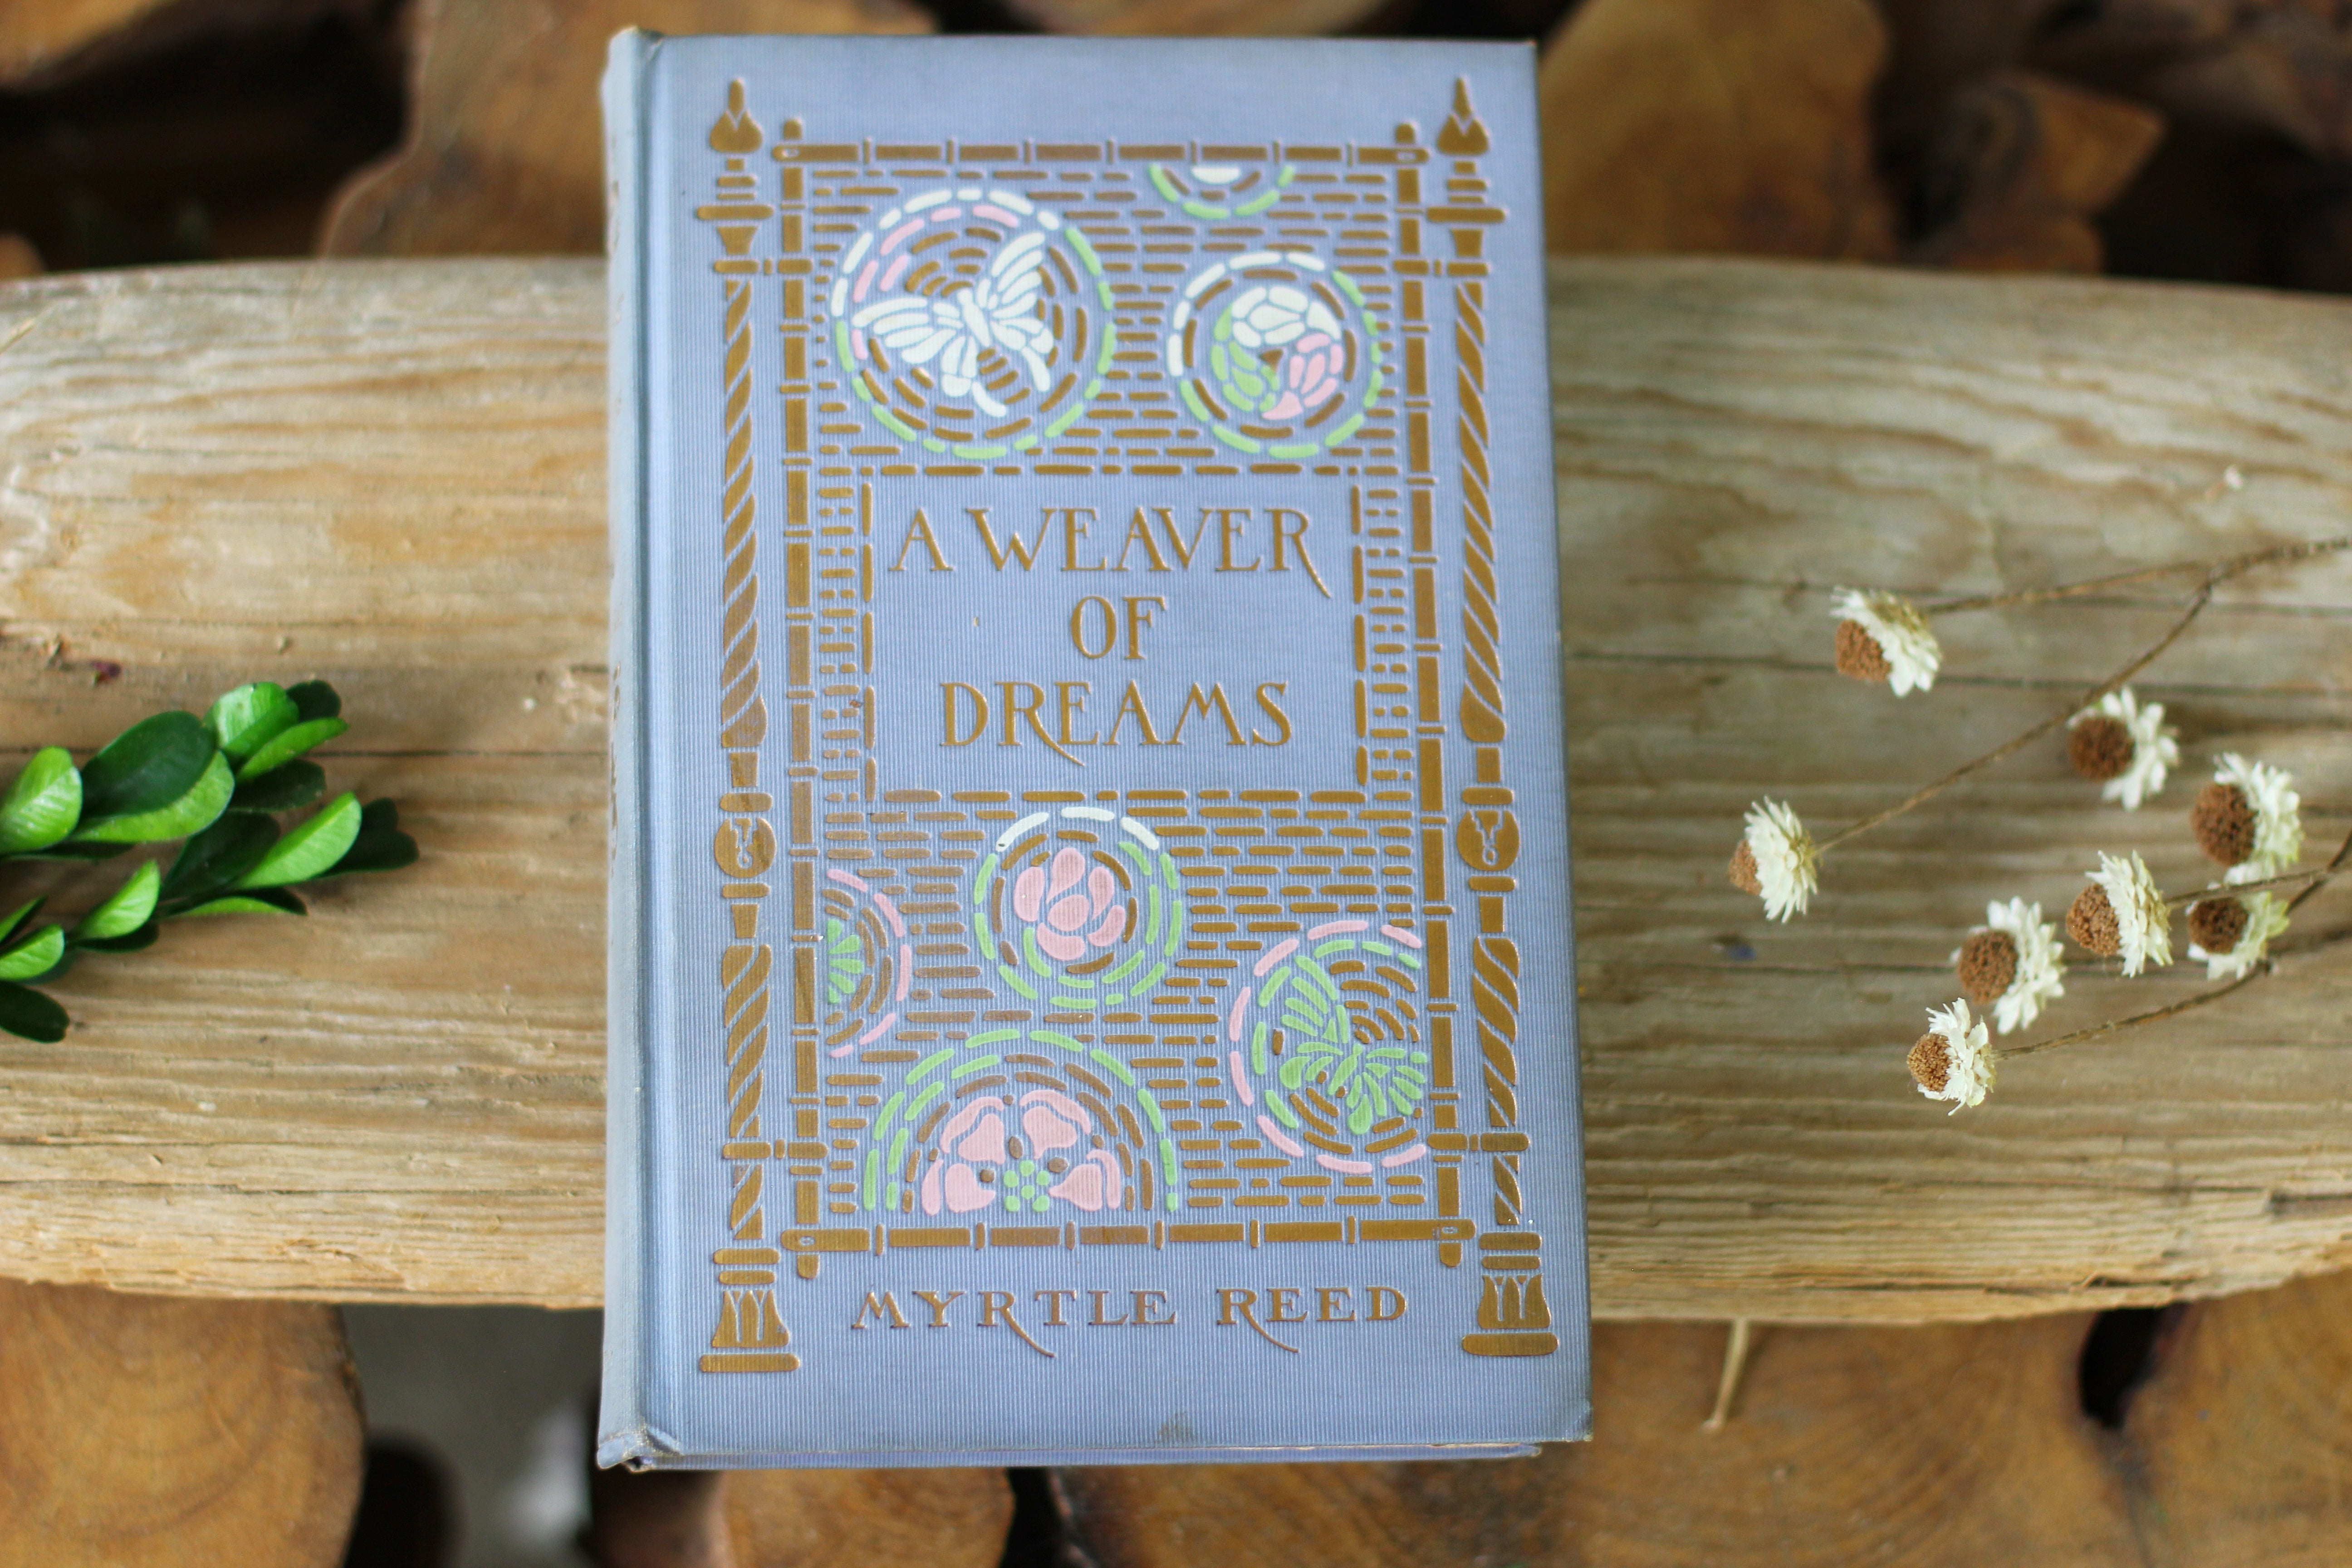 Antique Book A Weaver of Dreams by Myrtle Reed 1911 Hardback.